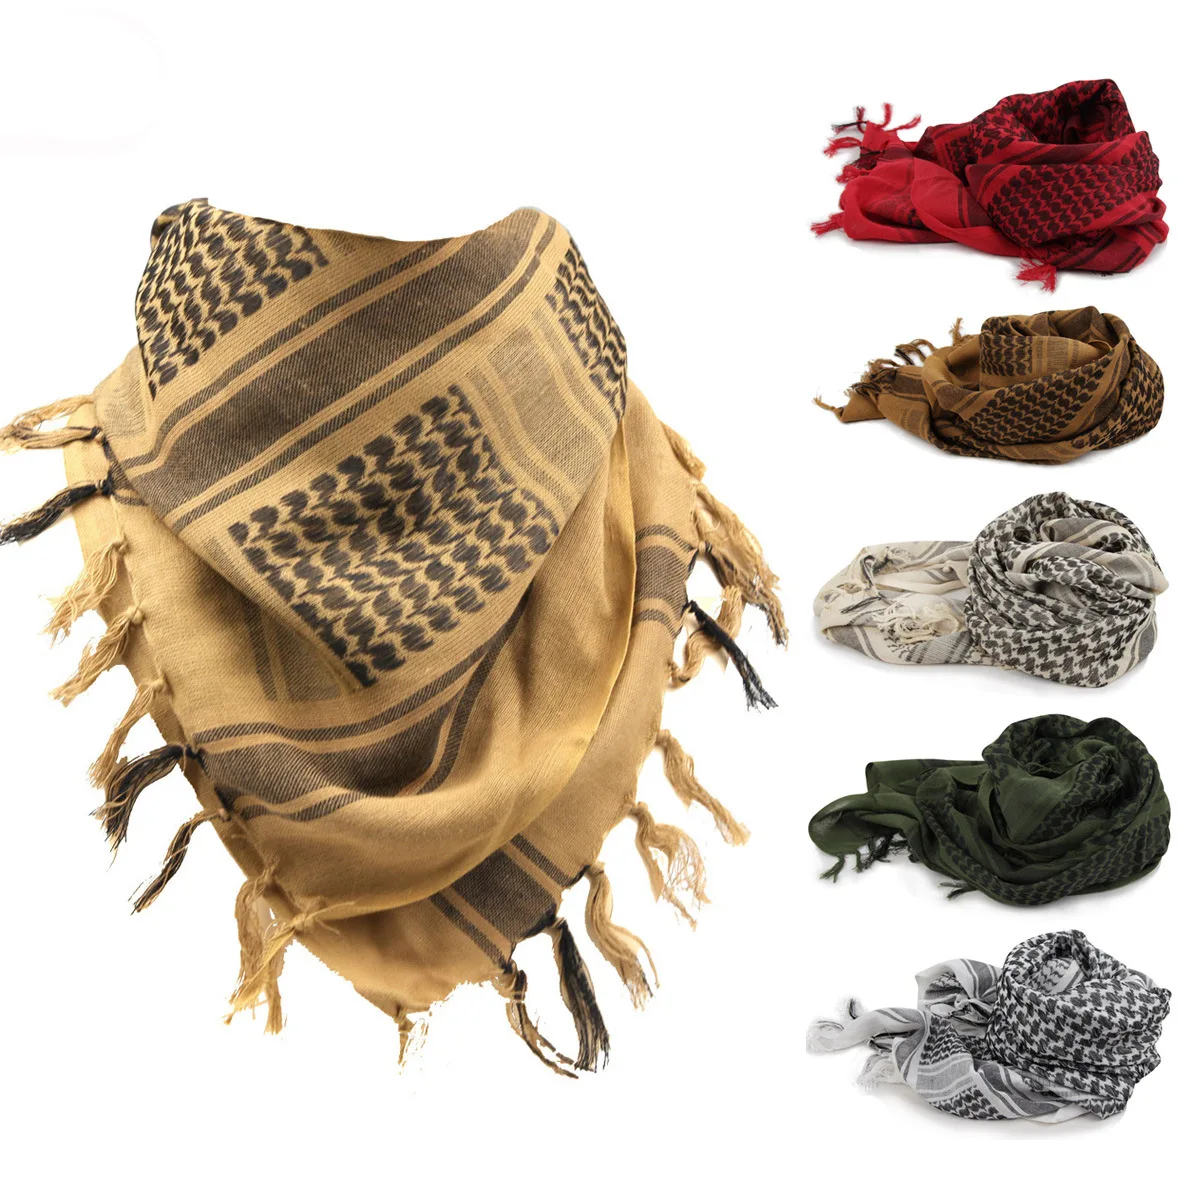 100%Cotton Thicker Arab Scarves Men Winter Military Keffiyeh Windproof Scarf Muslim Hijab Shemagh Tactical Desert Square Wargame-animated-img